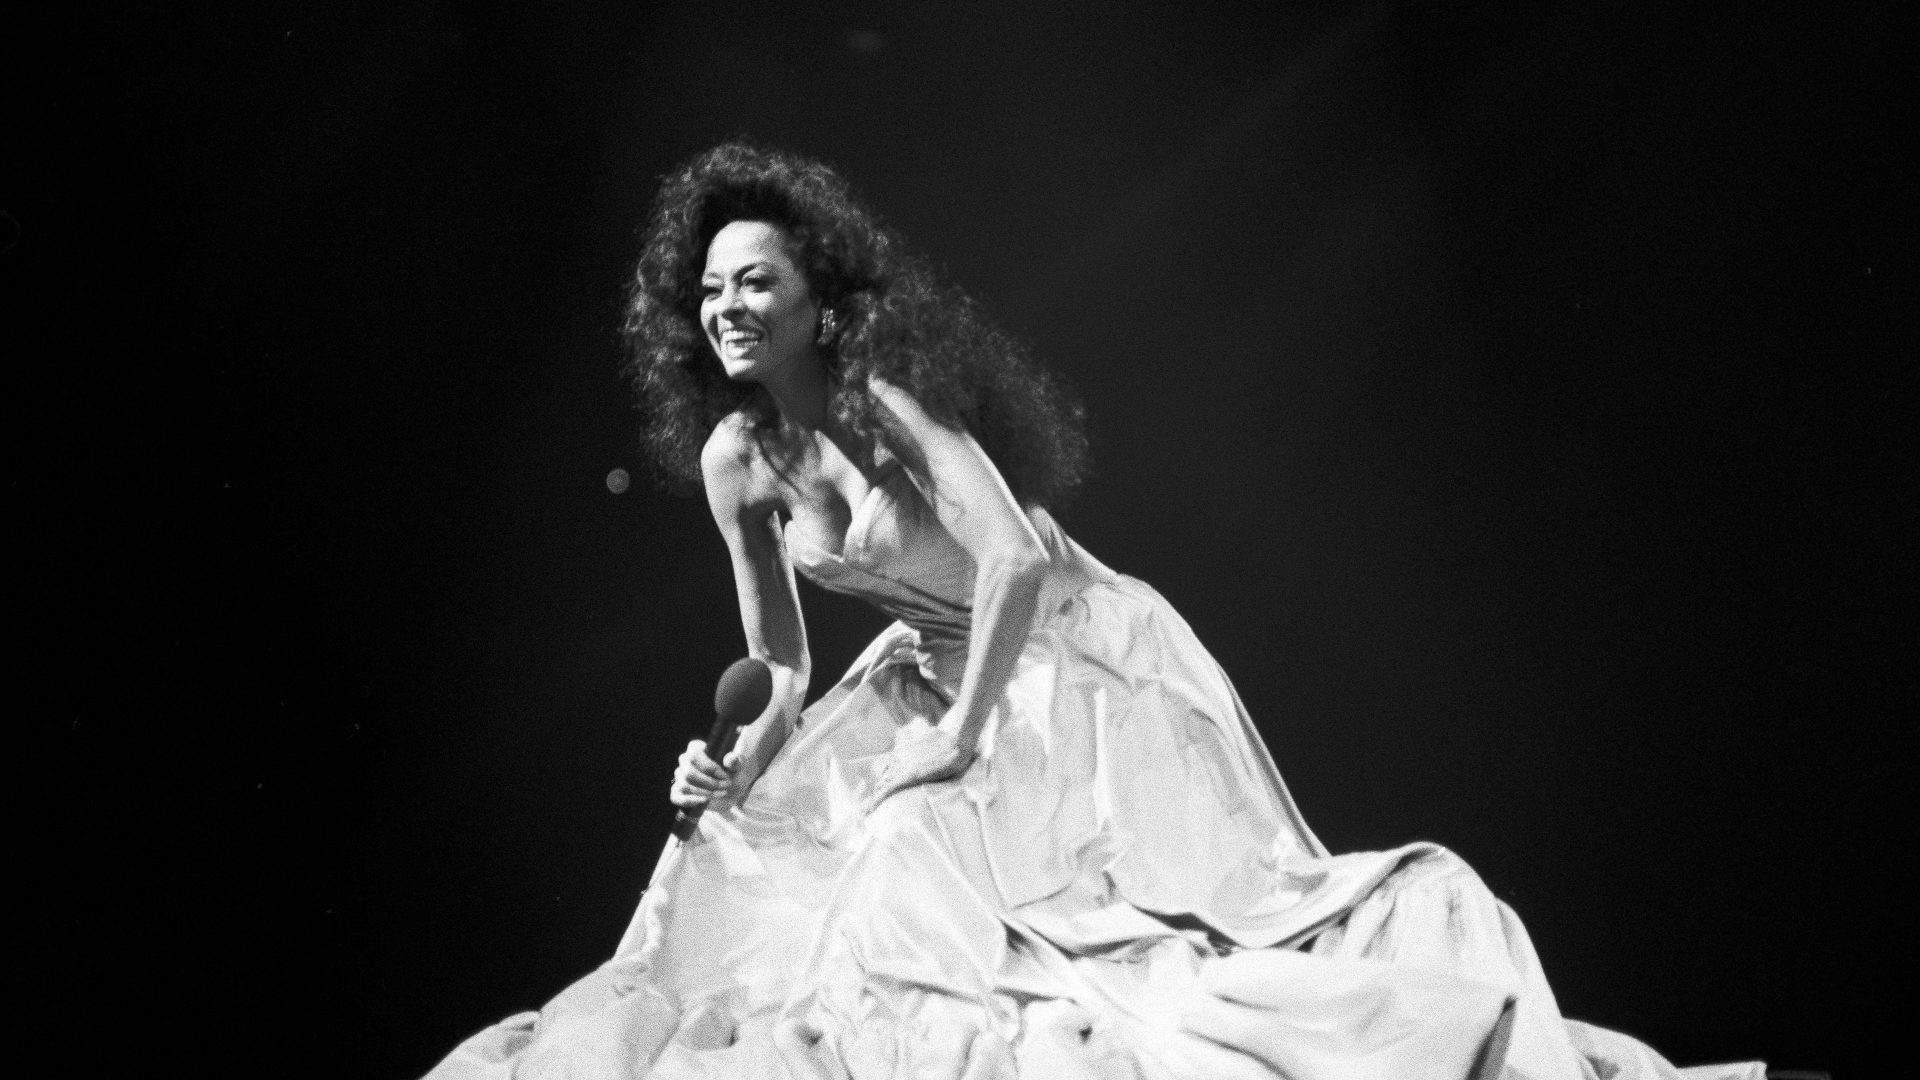 Diana Ross performs during her 1994 European tour. Photo: Michael Putland/Getty Images